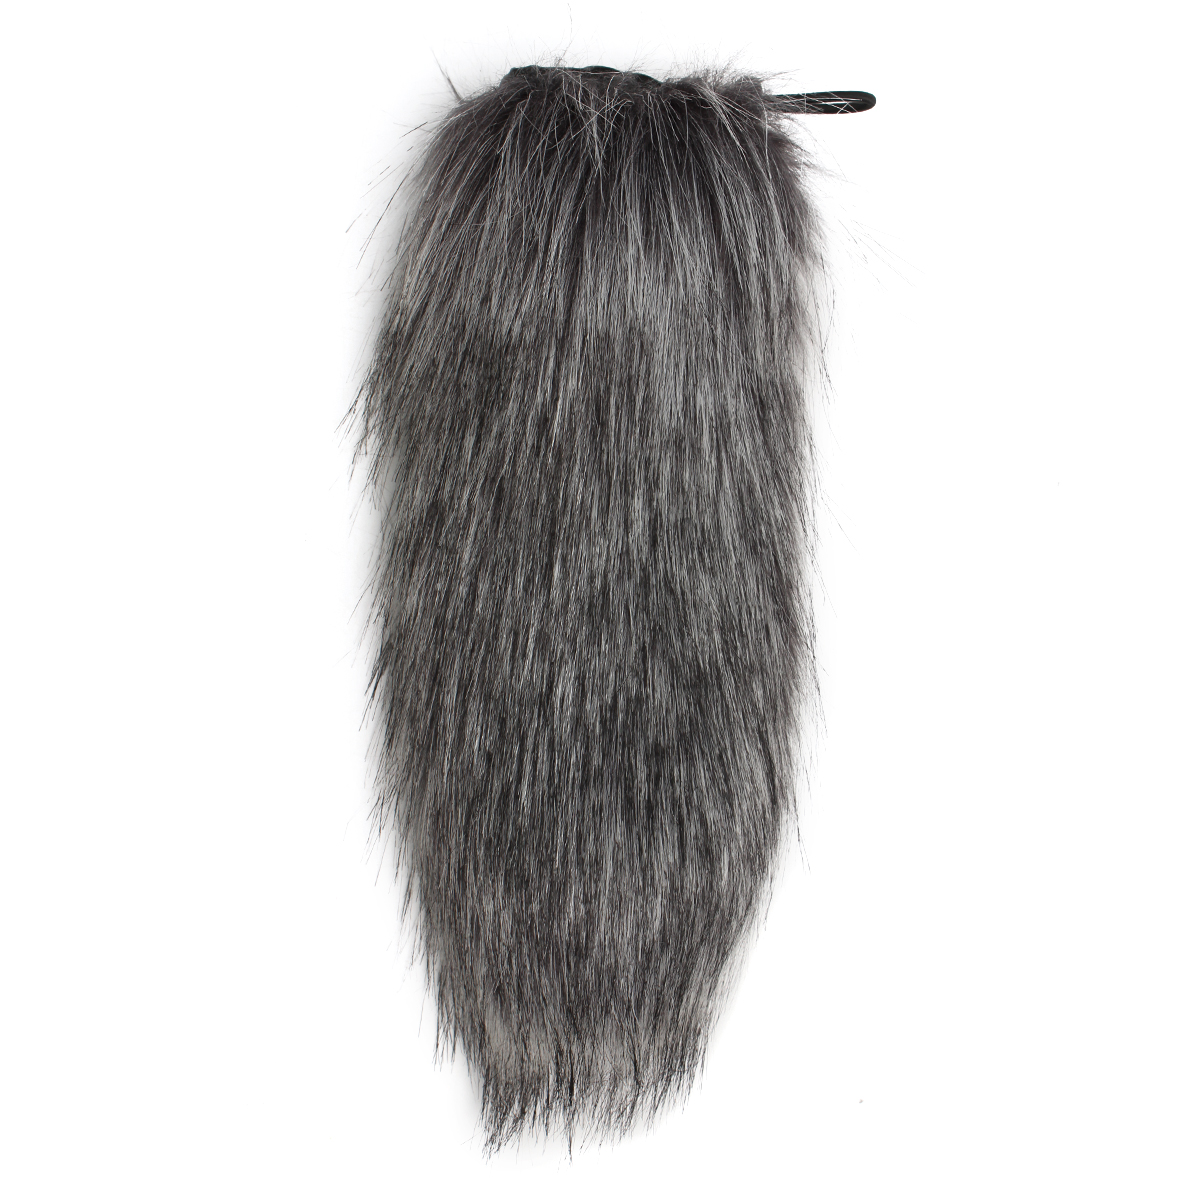 

Outdooors MIC Faux Fur Cover Windscreedn Wind Shield For Rode Videomic Microphone